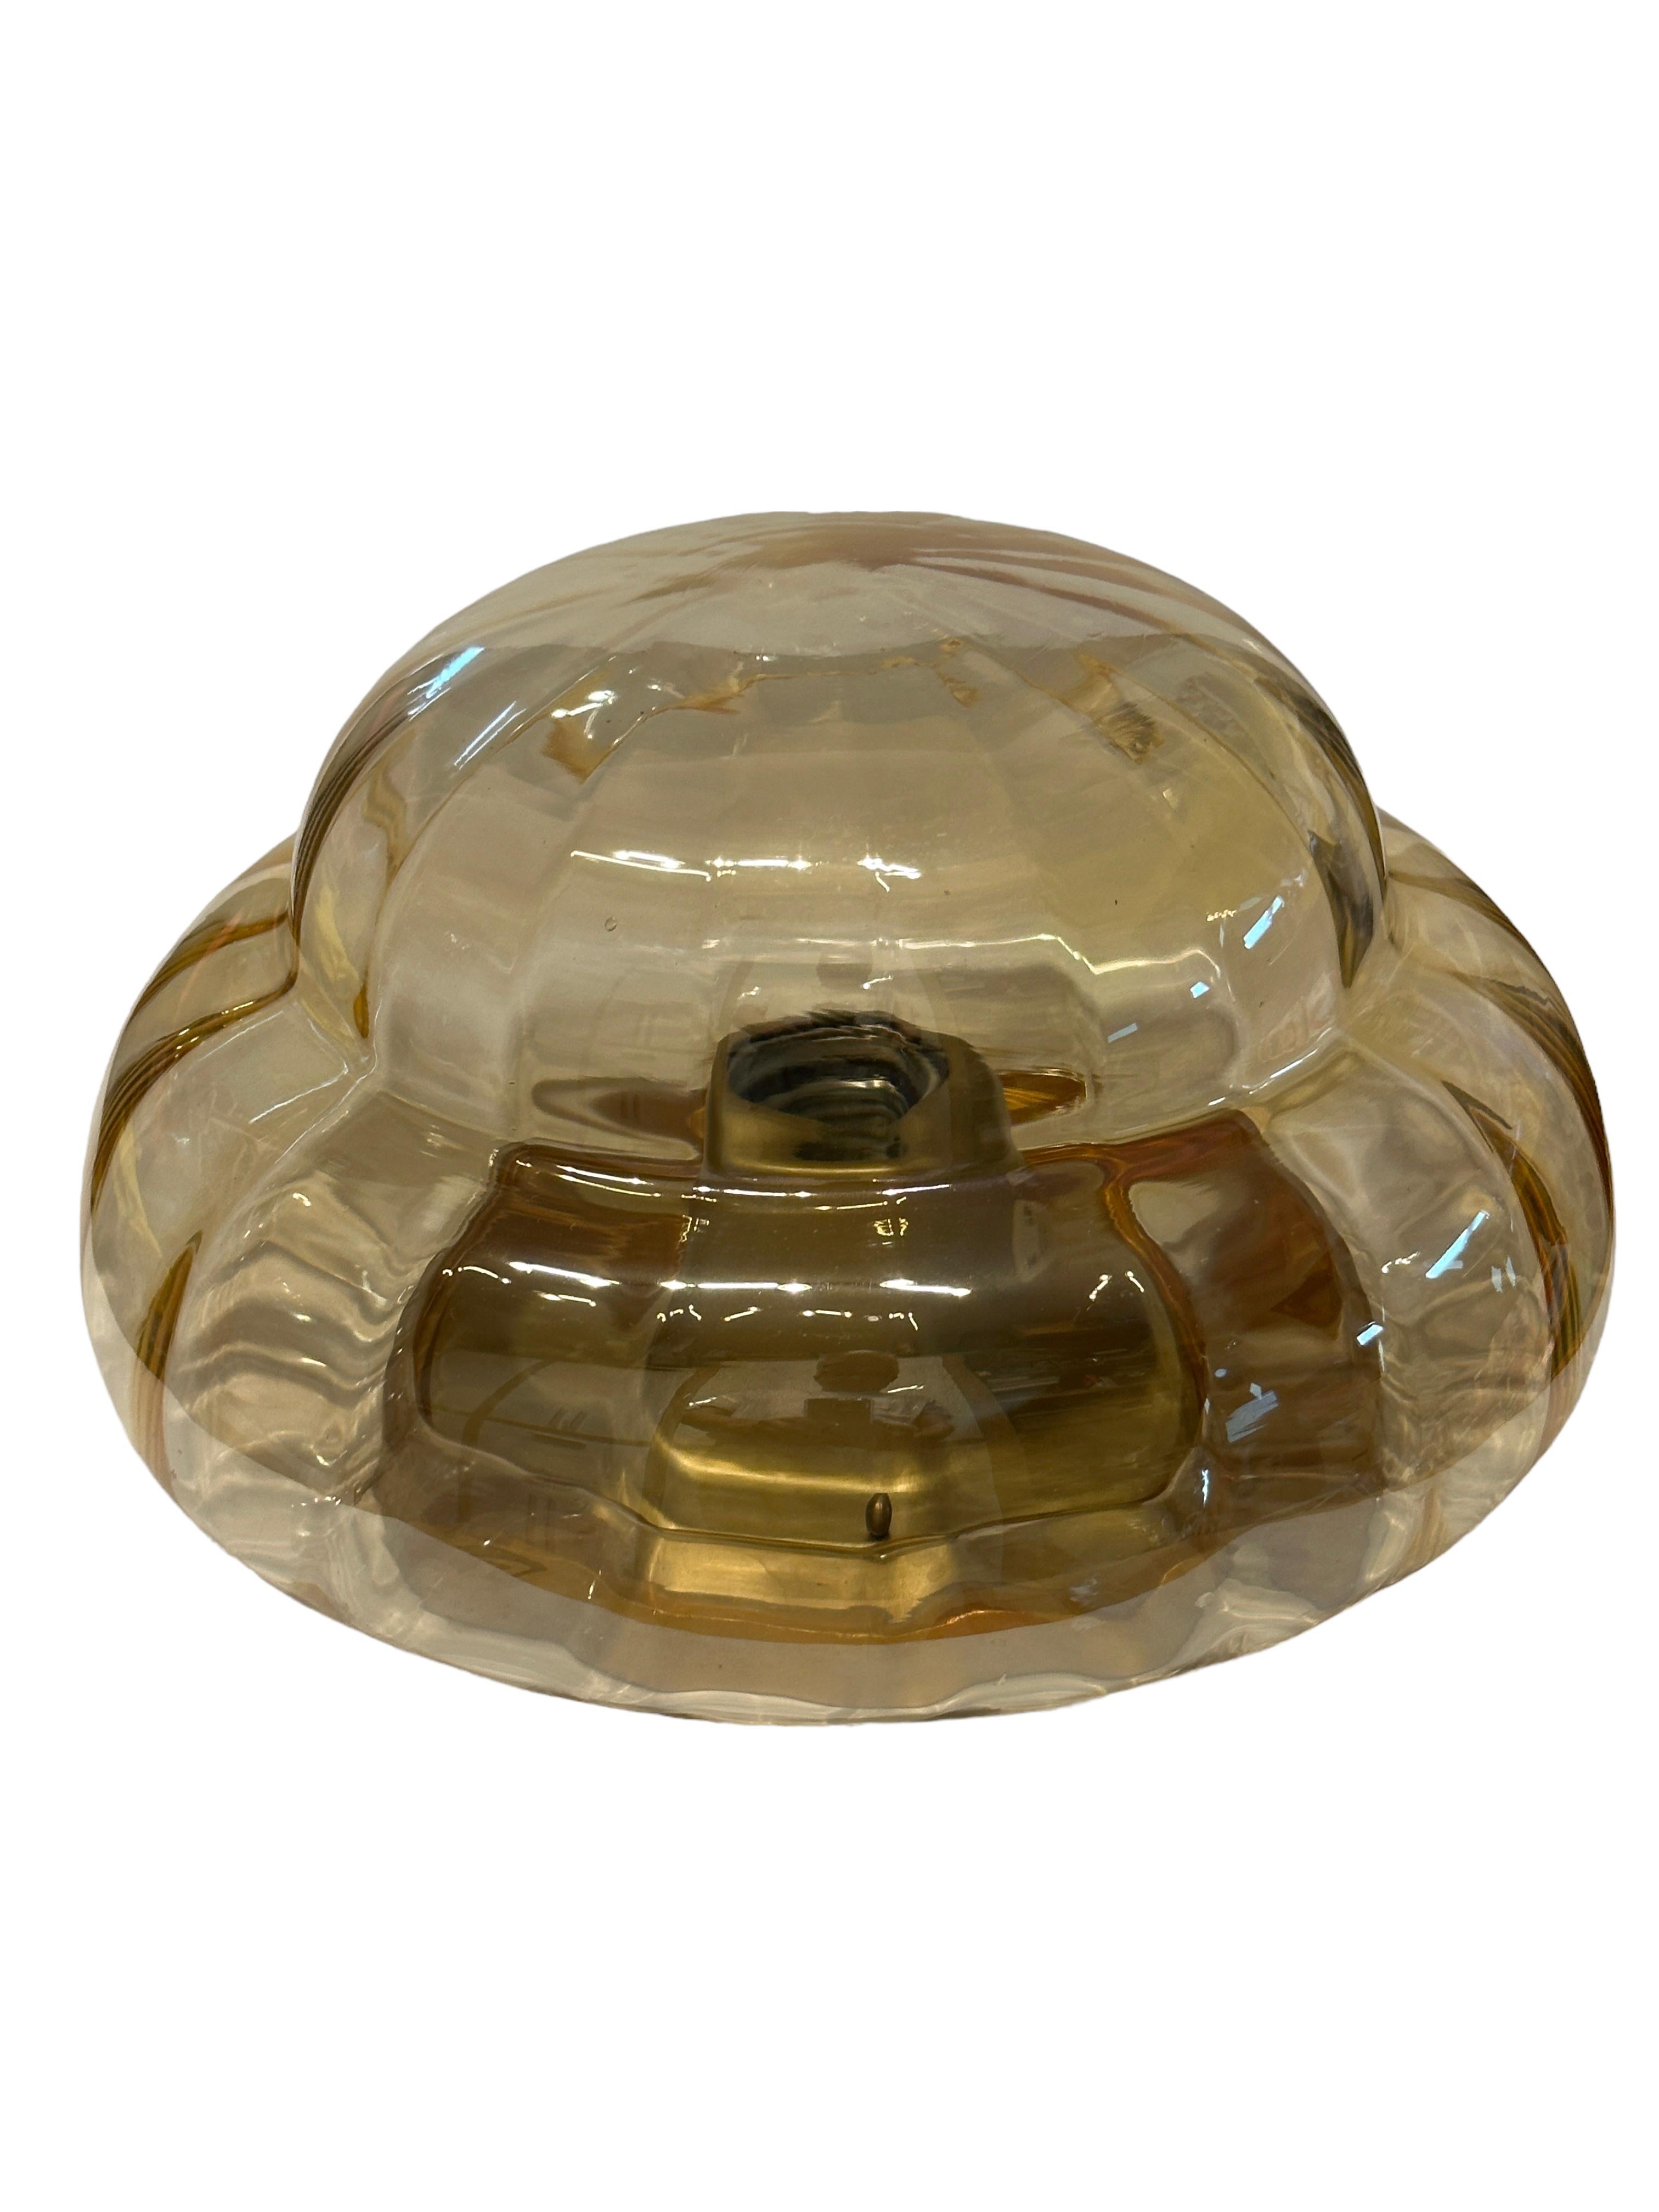 A petite gorgeous glass flush mount. It can be used also as a wall light. The light fixture requires one European E27 bulb, up to 60 watts. Amber smoked glass, mounted on a gilded base. A nice addition to any room. Found at an estate sale in Vienna,